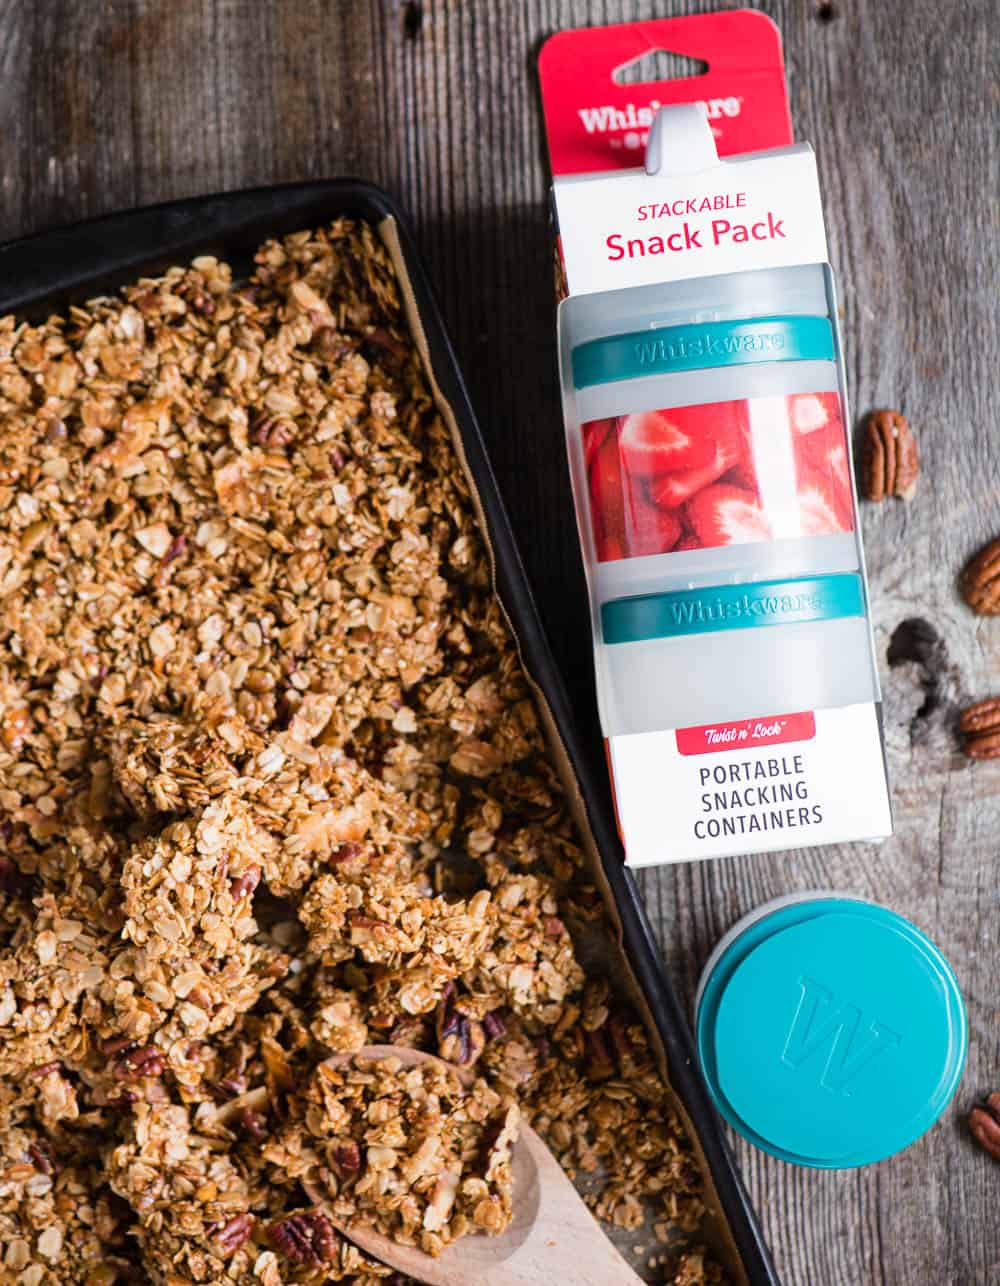 whiskware snack pack and granola